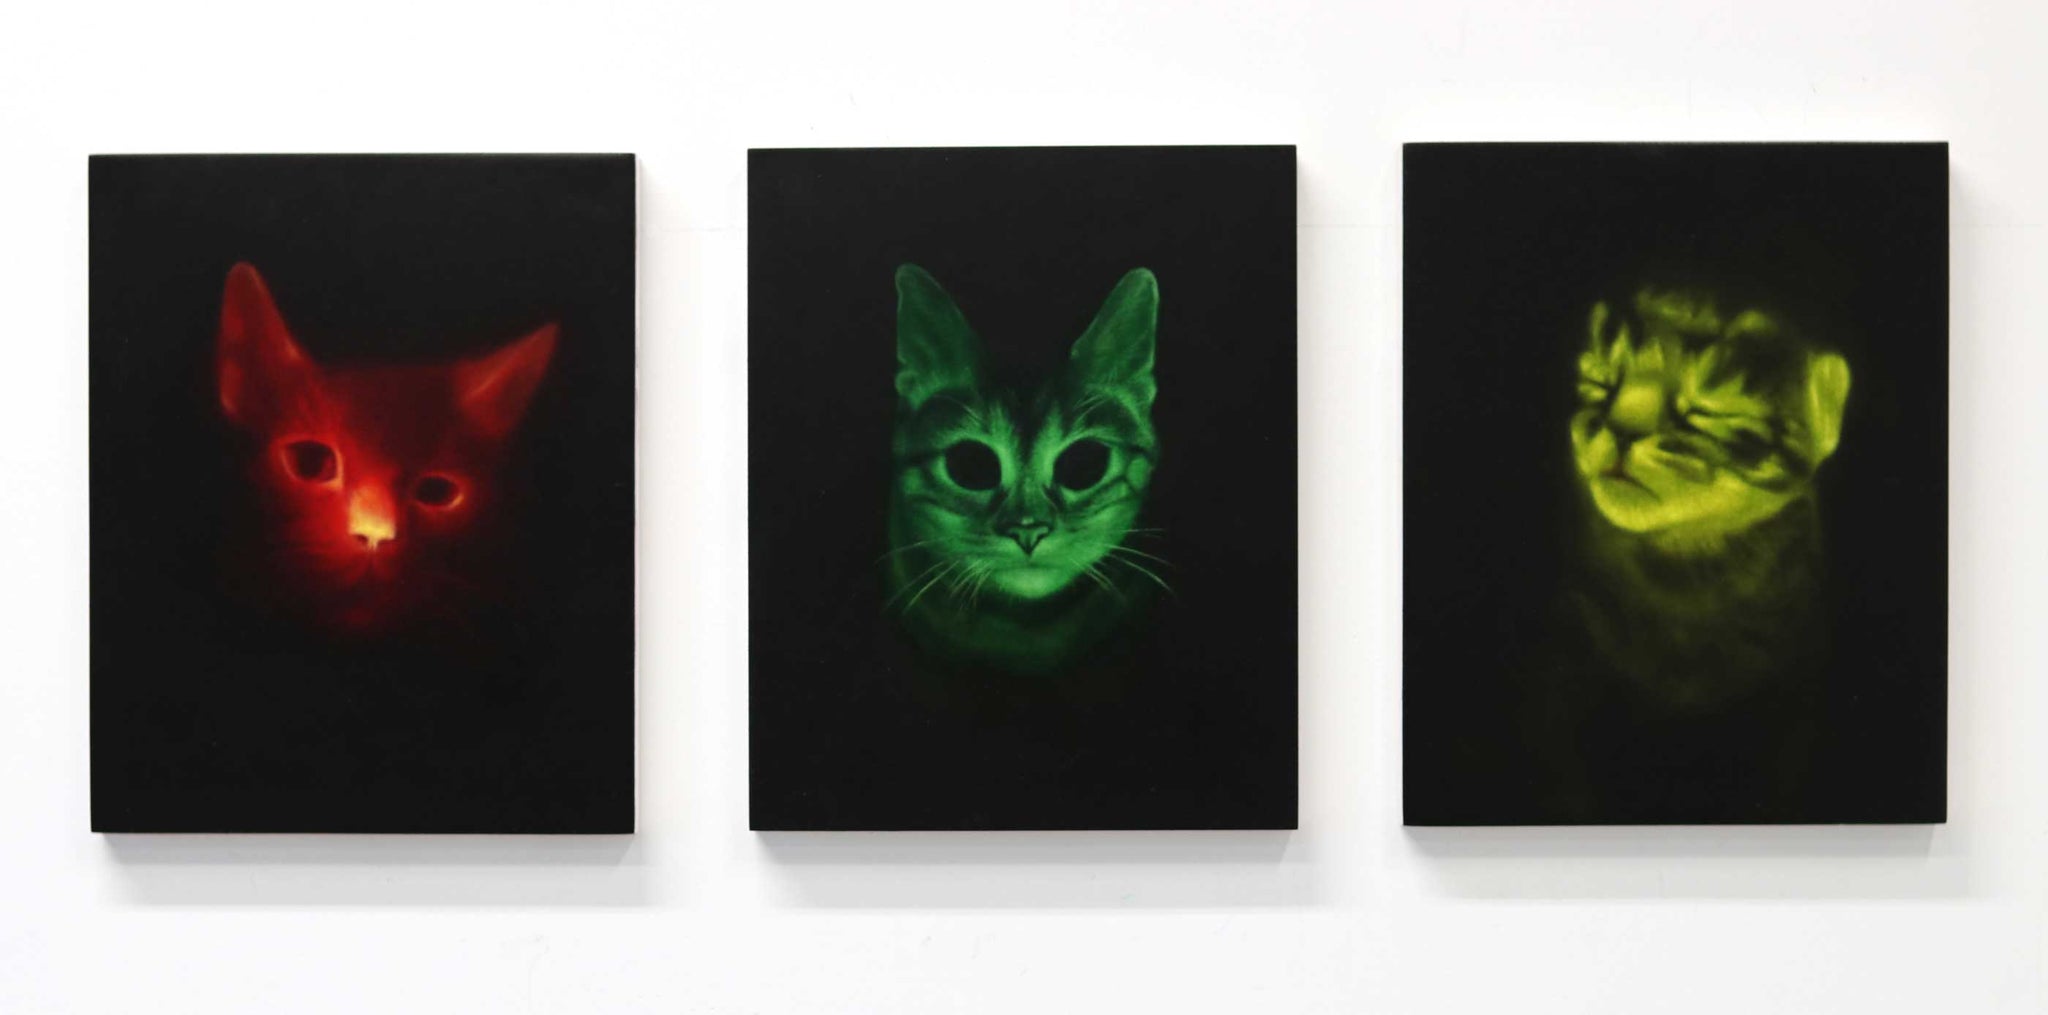 Three Genetically Engineered Cats (Red, Green, Yellow-Green), 2020